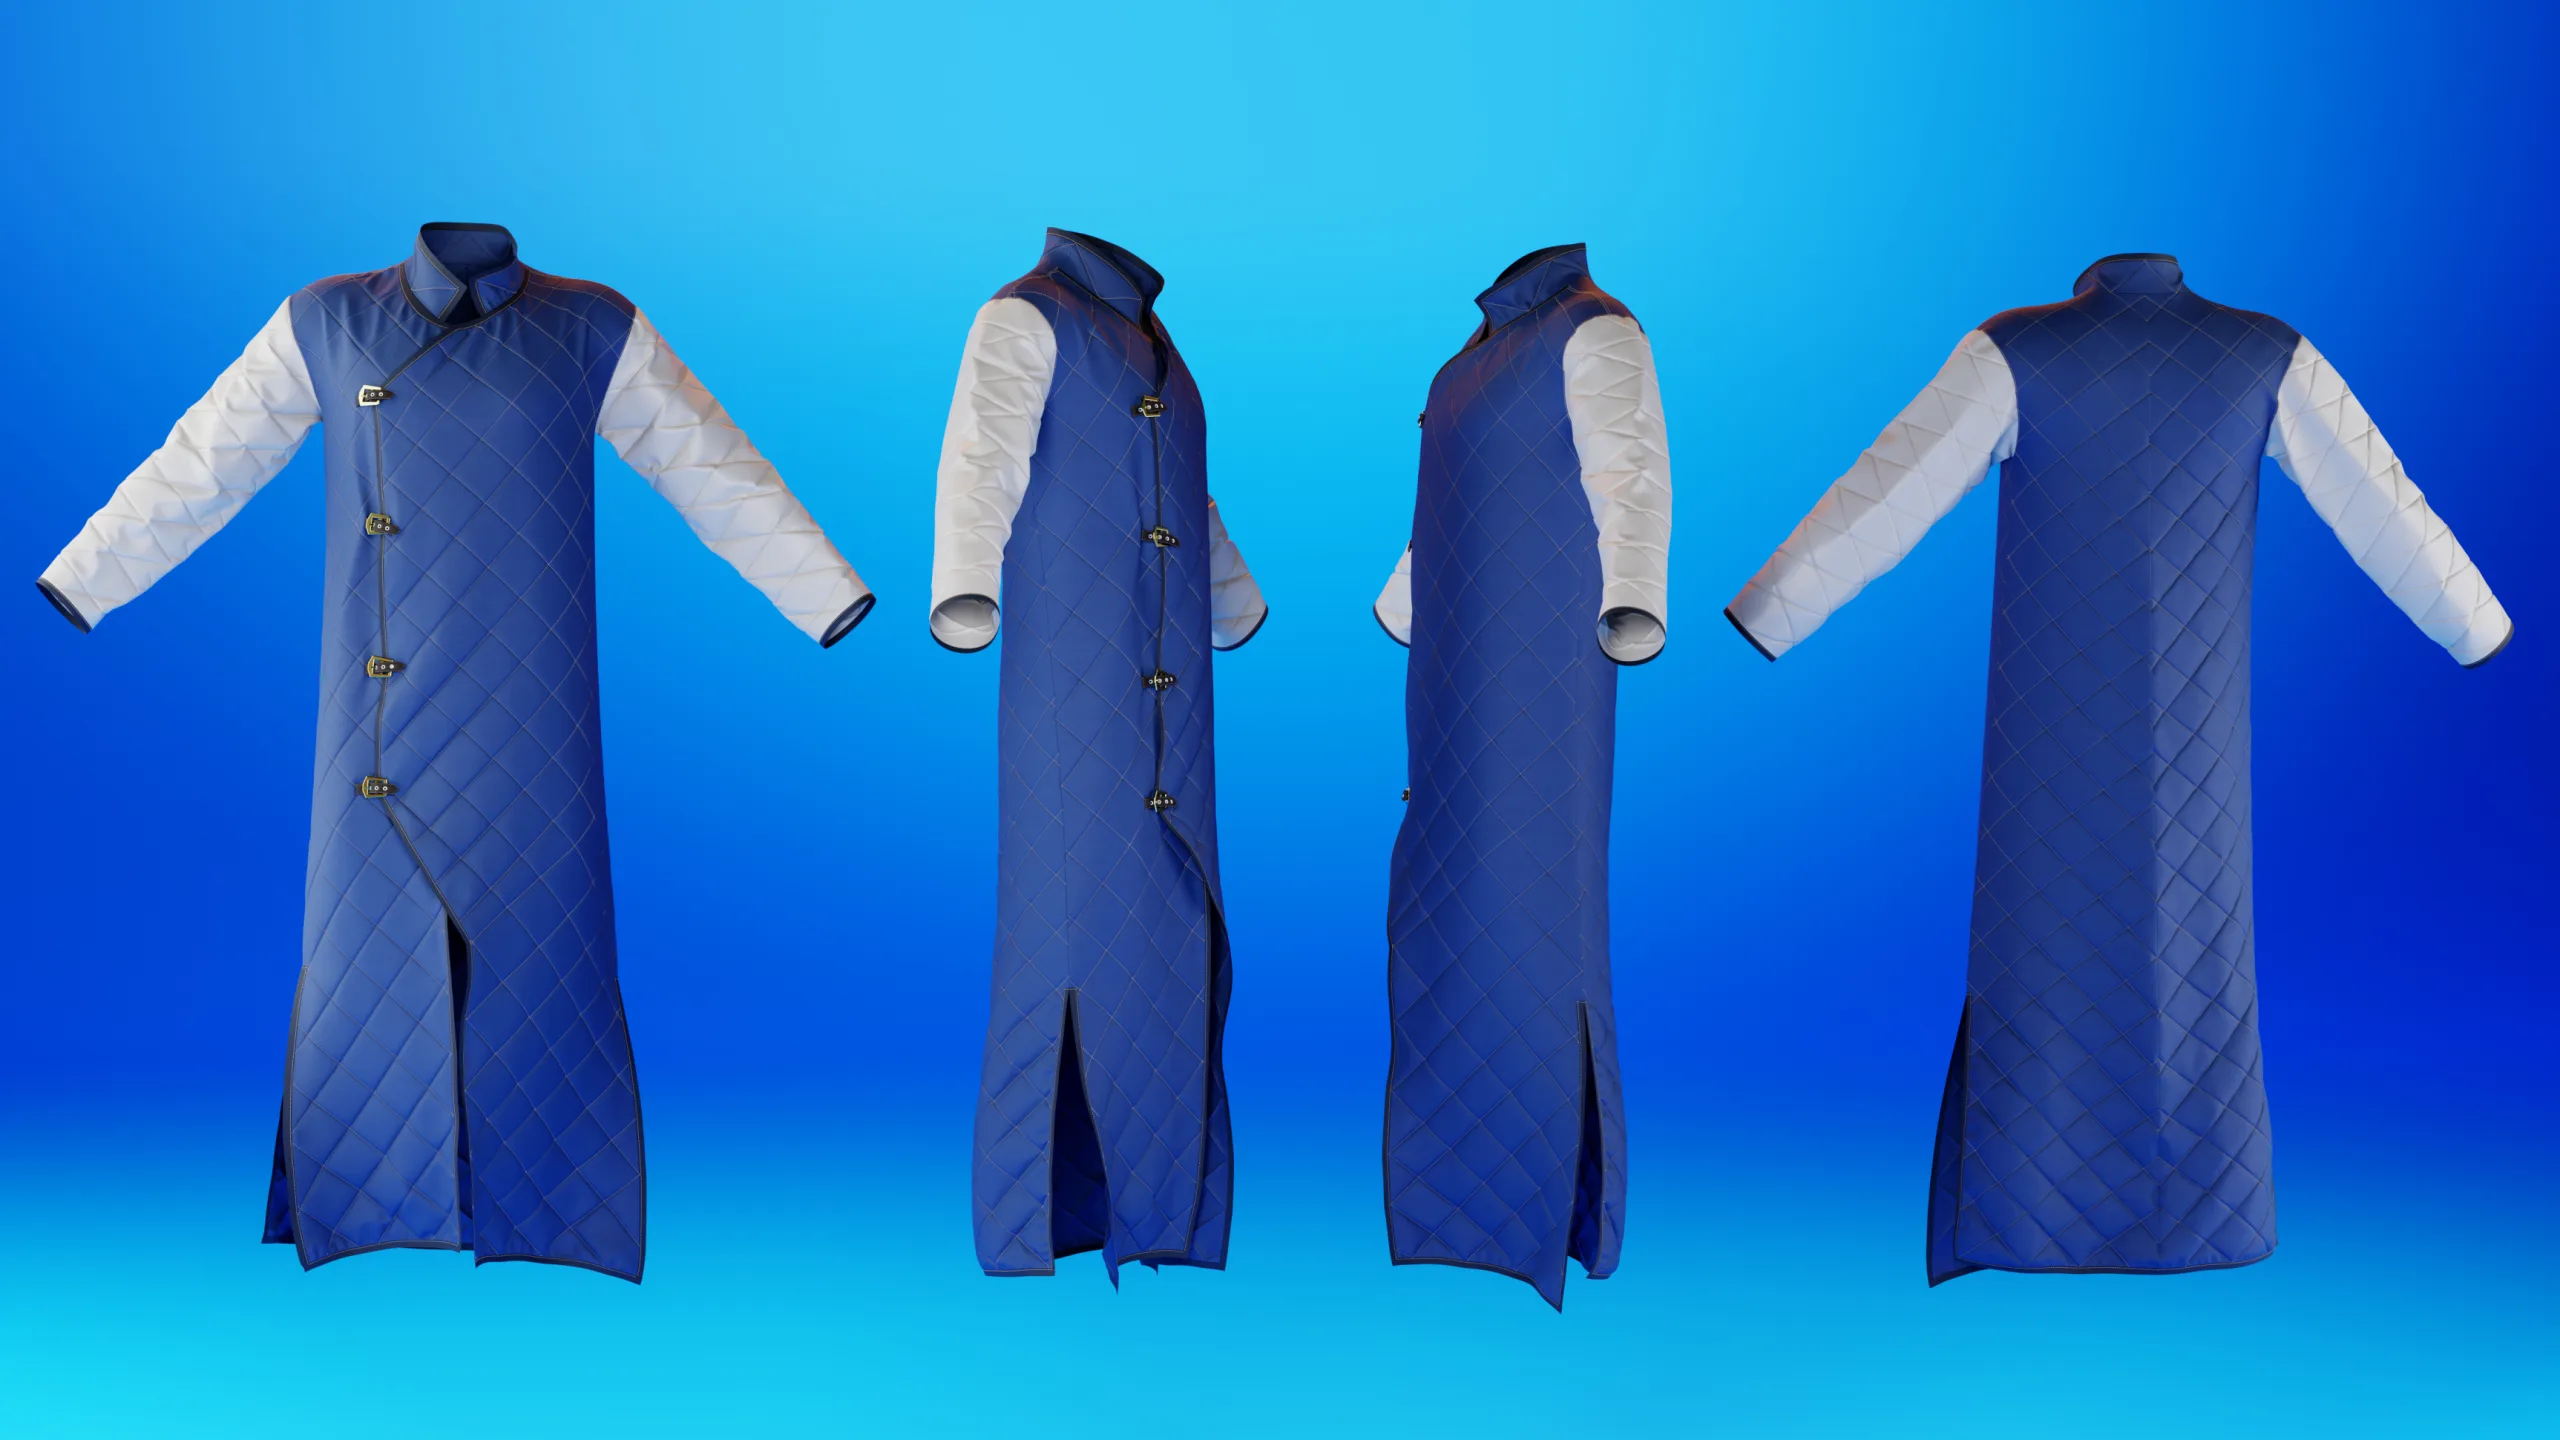 6 Medieval Clothes (Gambeson) Basemesh Models + Reference Images for texturing + Bonus + Project Files